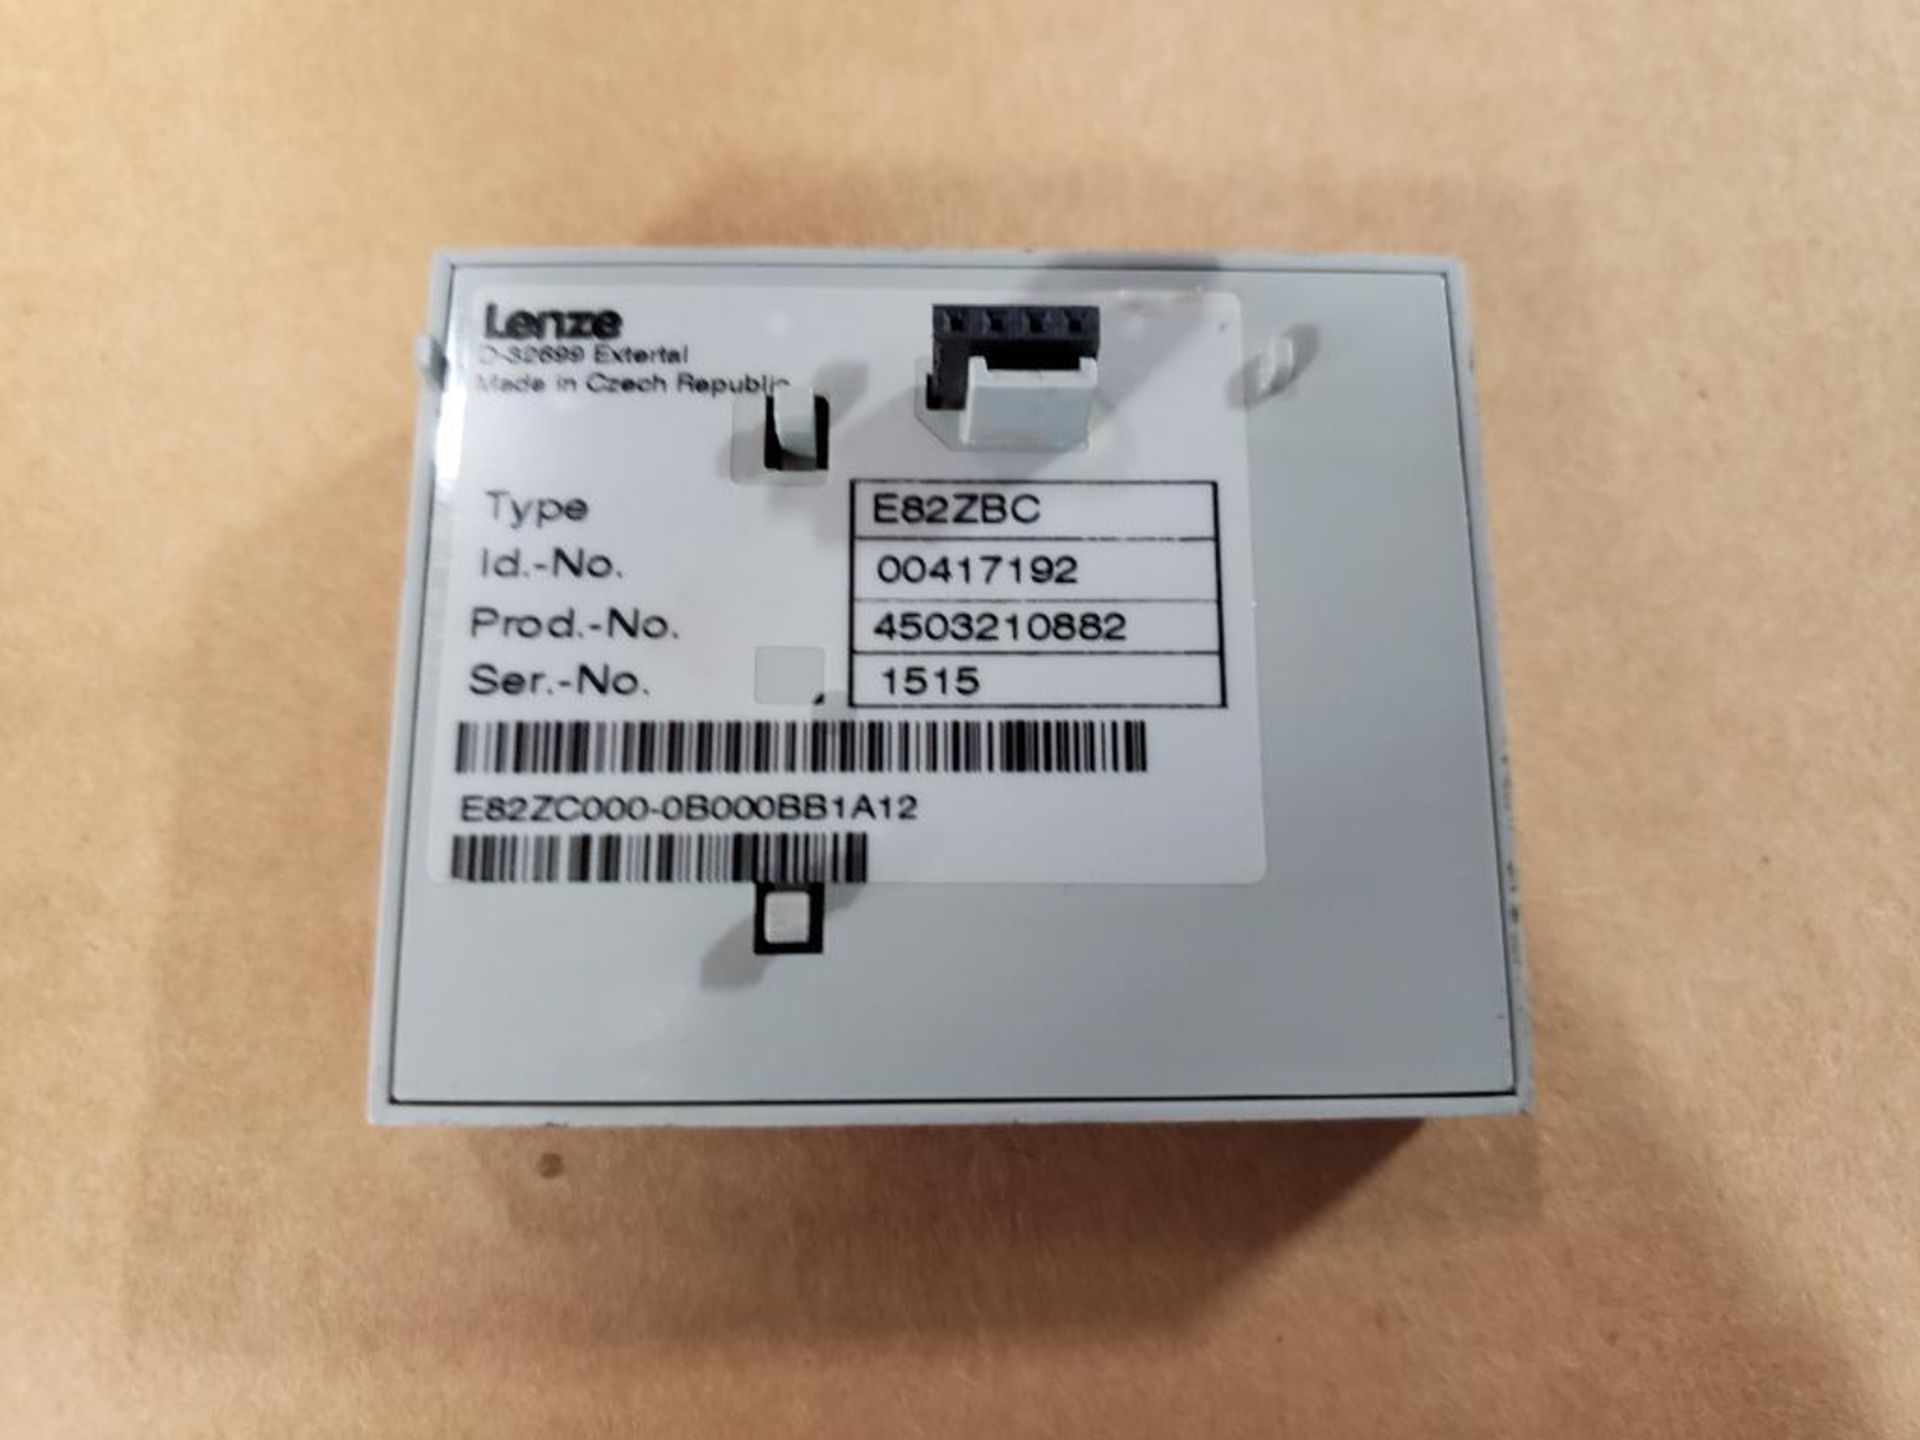 Qty 2 - Lenze 8200 vector drive. Includes Qty 2 - E82ZBC controller. - Image 4 of 4